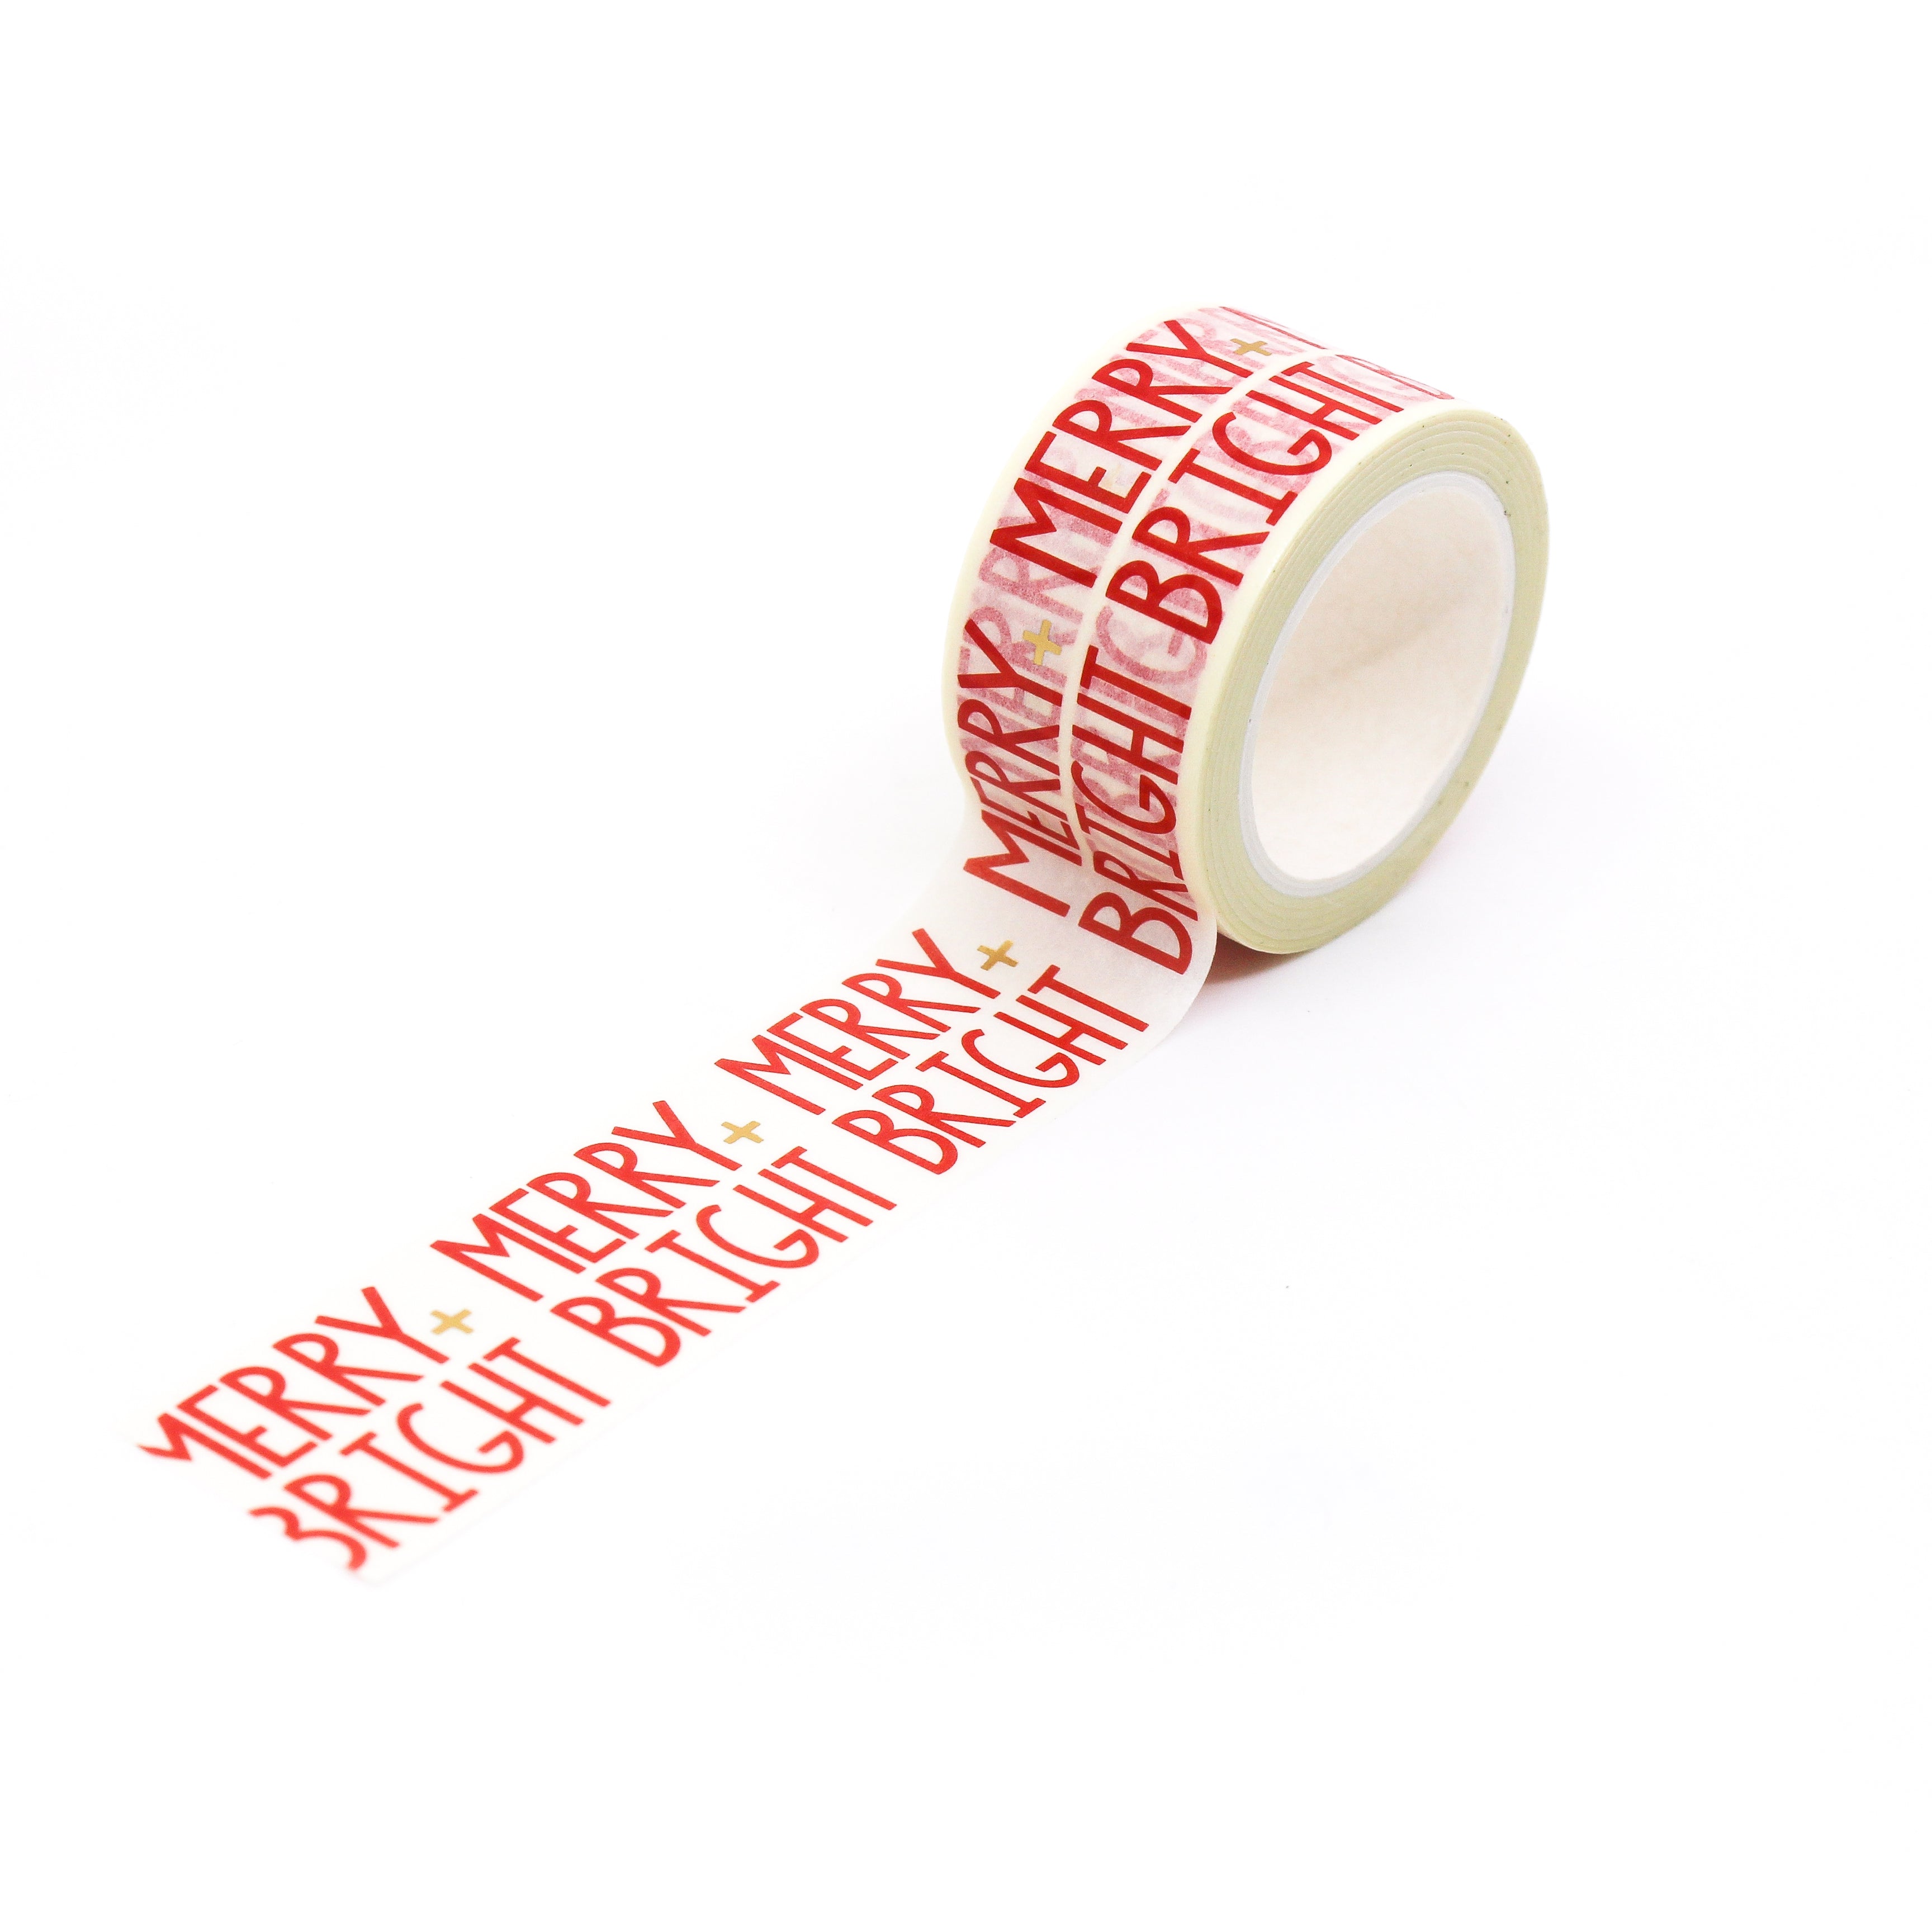 This is a full pattern repeat view of merry and bright text washi tape BBB Supplies Craft Shop